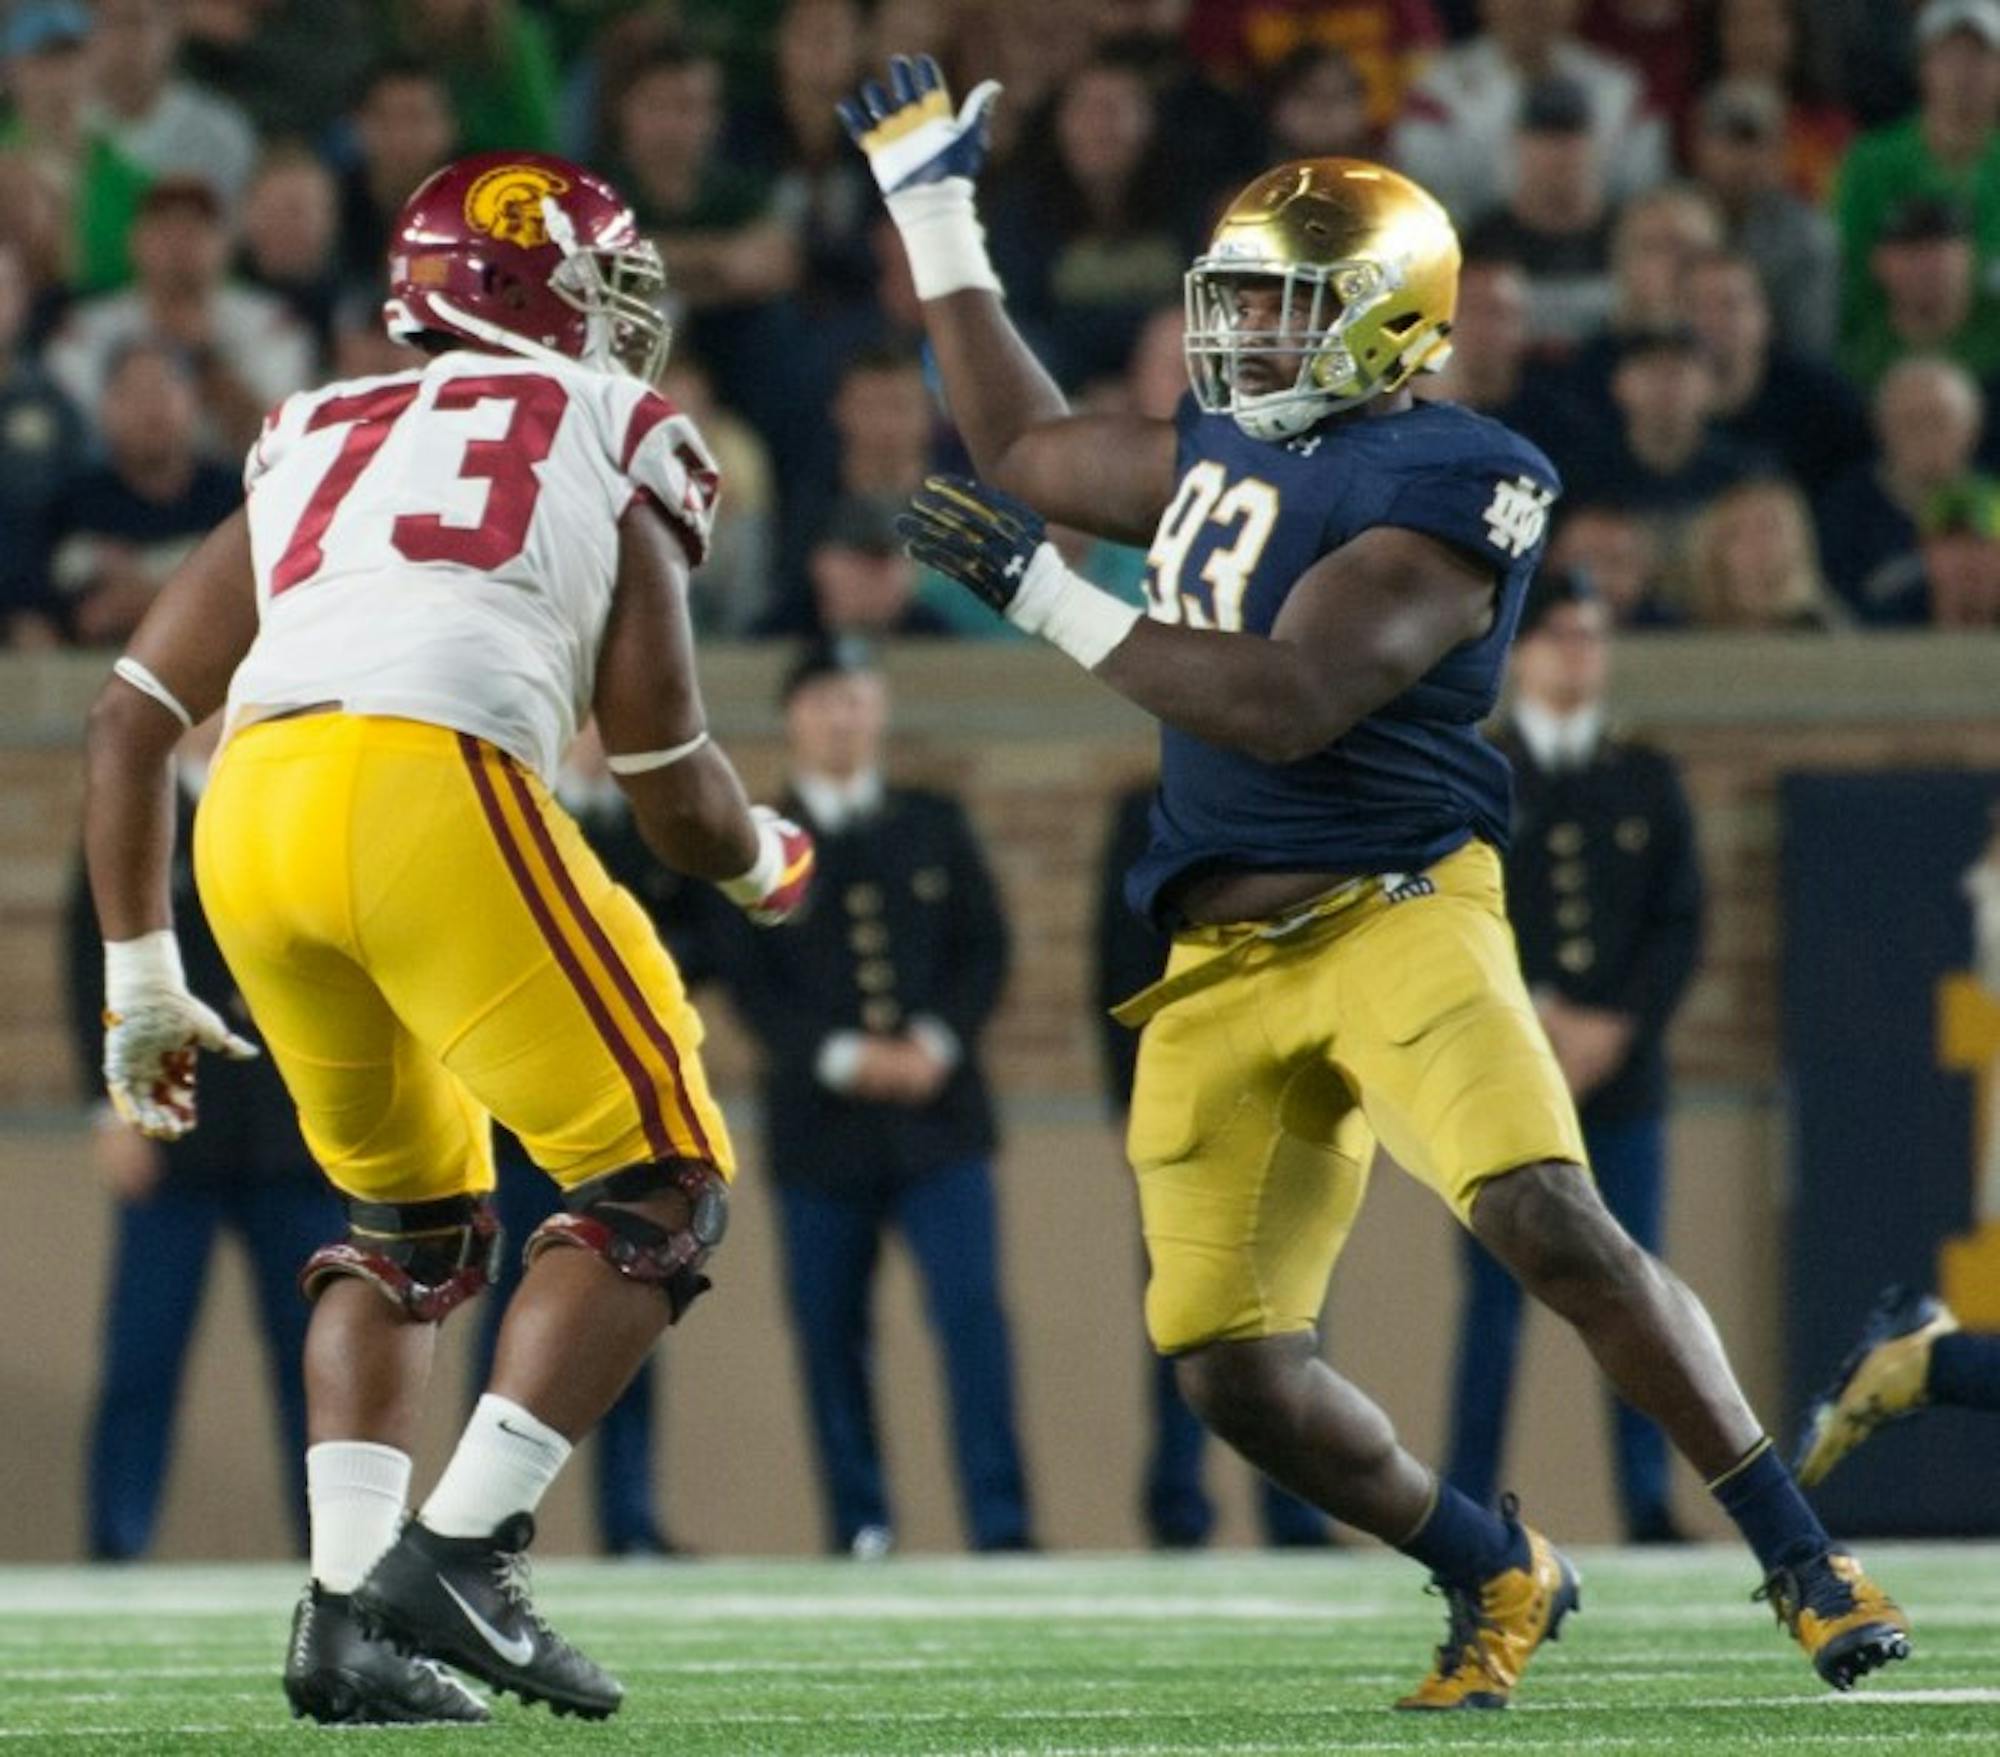 Irish senior defensive lineman Jay Hayes rushes past a USC defender during Notre Dame's 49-14 win over the Trojans on Sat. at Notre Dame Stadium.